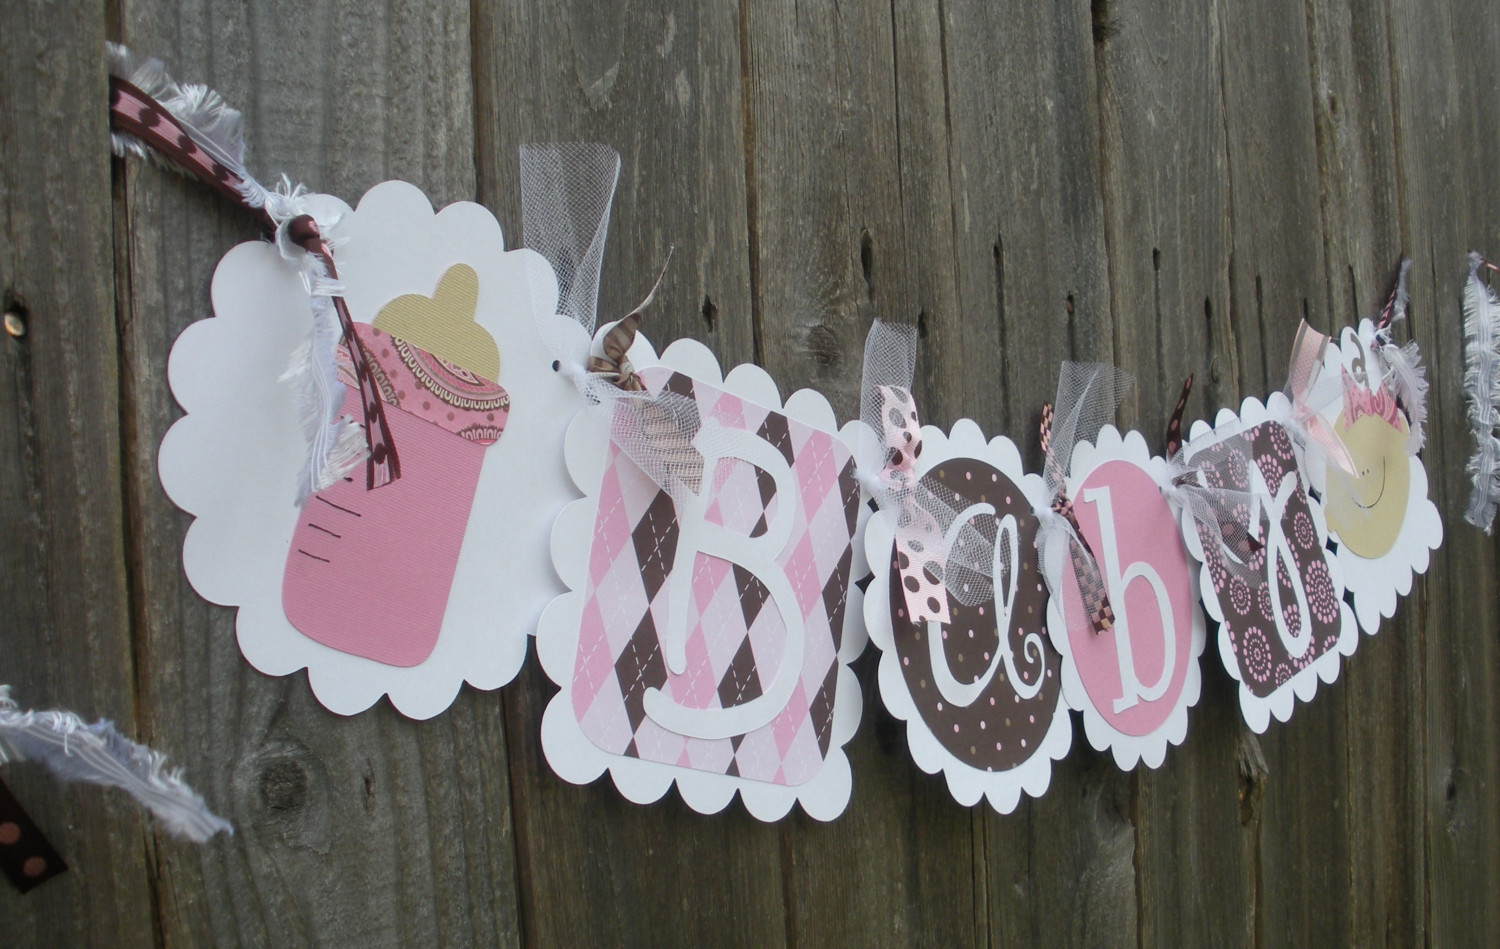 Baby Banner DIY
 DIY Your Very Own Baby Shower Banner With These Great Ideas